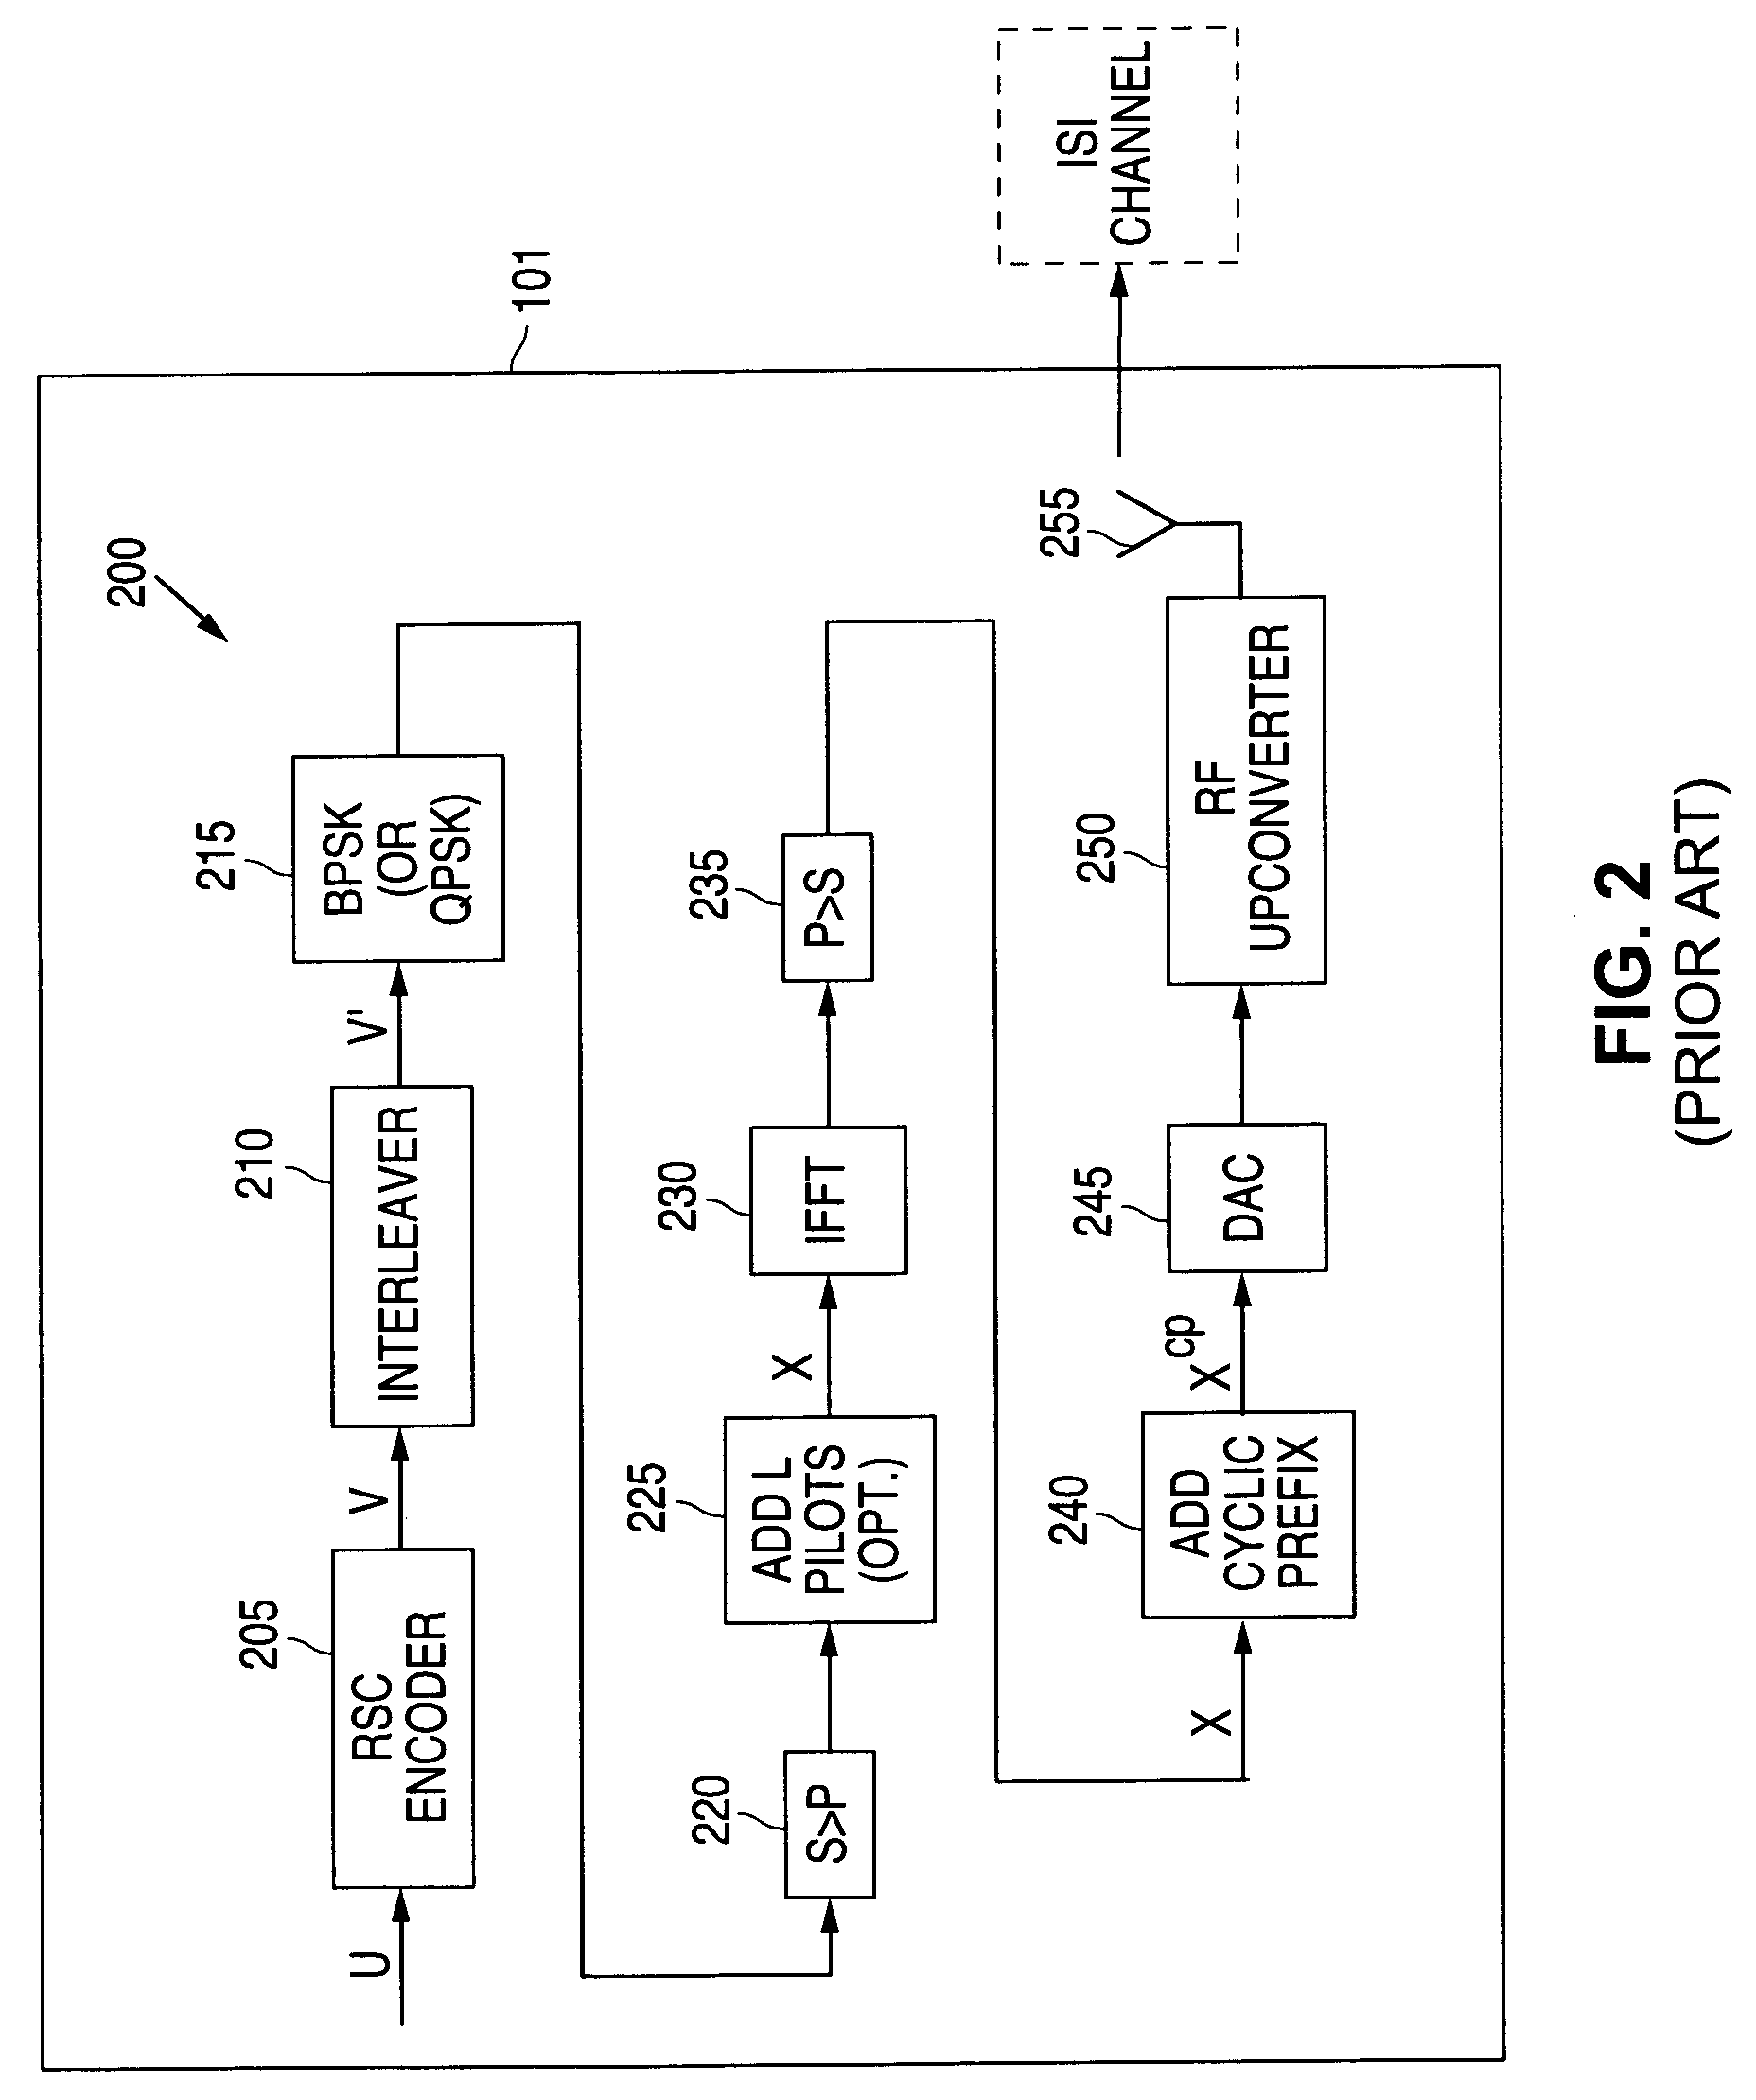 Coded OFDM system using error control coding and cyclic prefix for channel estimation